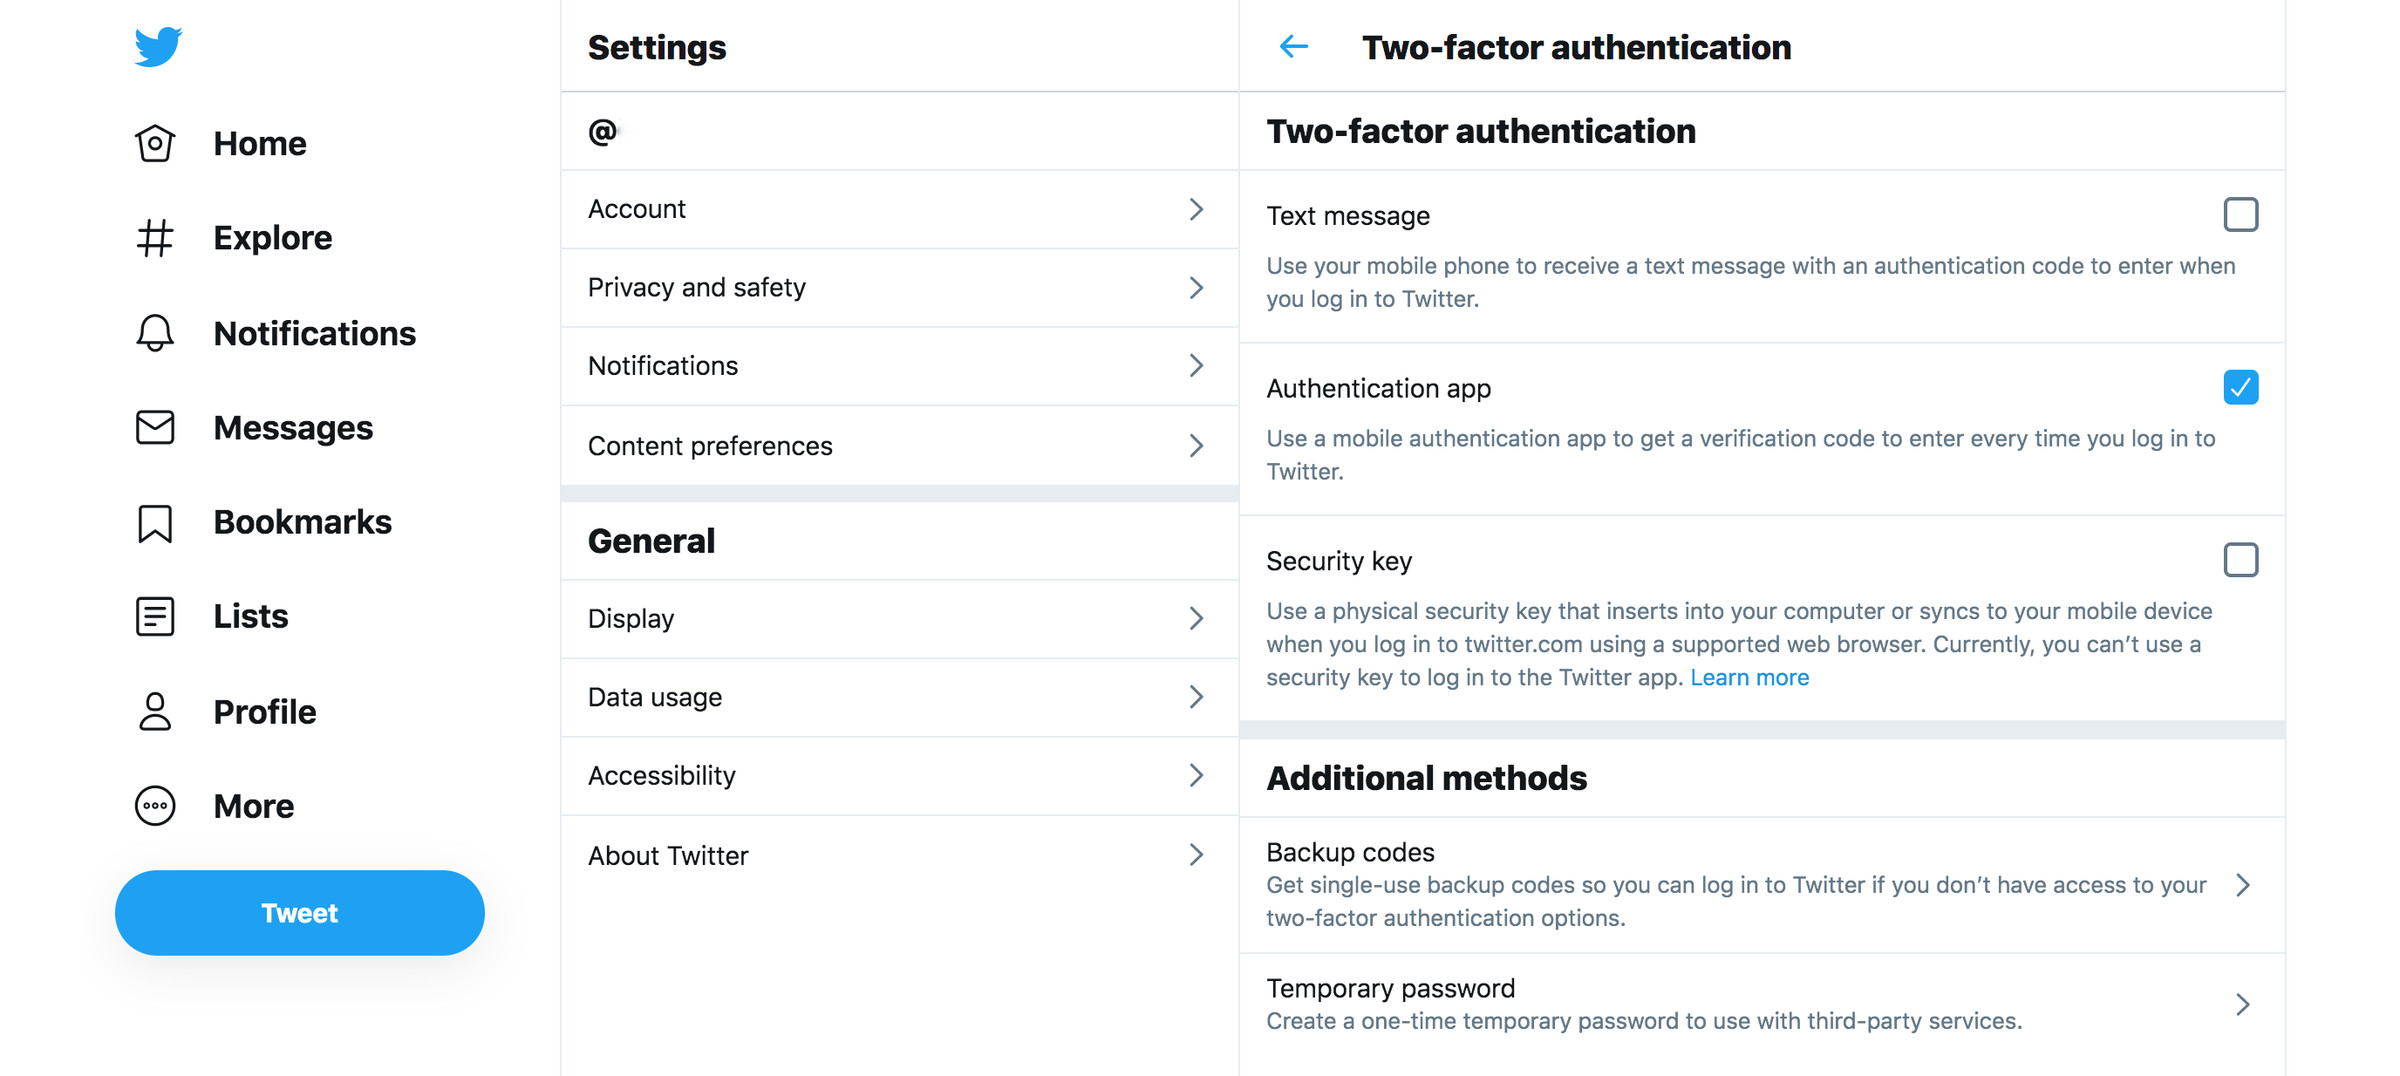 Twitter lets you use a text message, an app, or a security key for authentication.